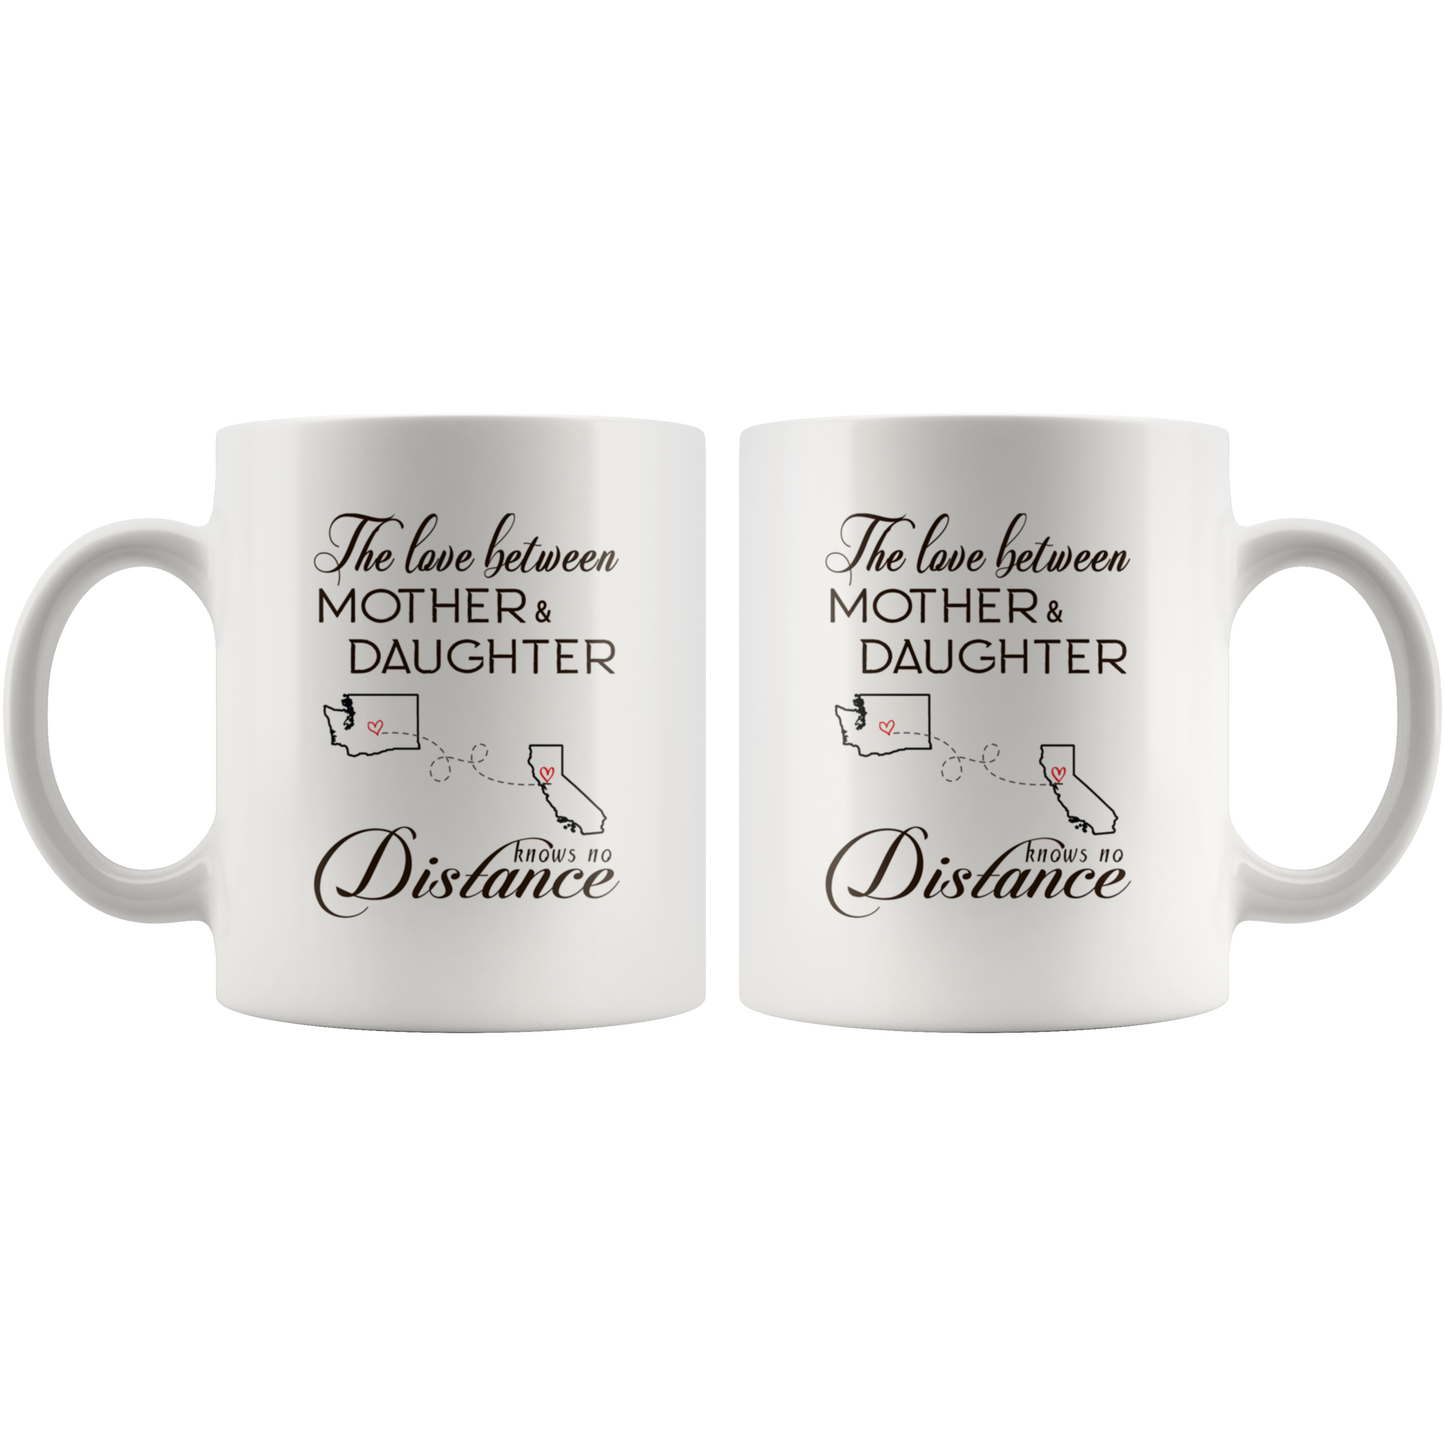 ND20604535-15oz-sp-24061 - [ Washington | California | Mother And Daughter ]Personalized Long Distance State Coffee Mug - The Love Betwe